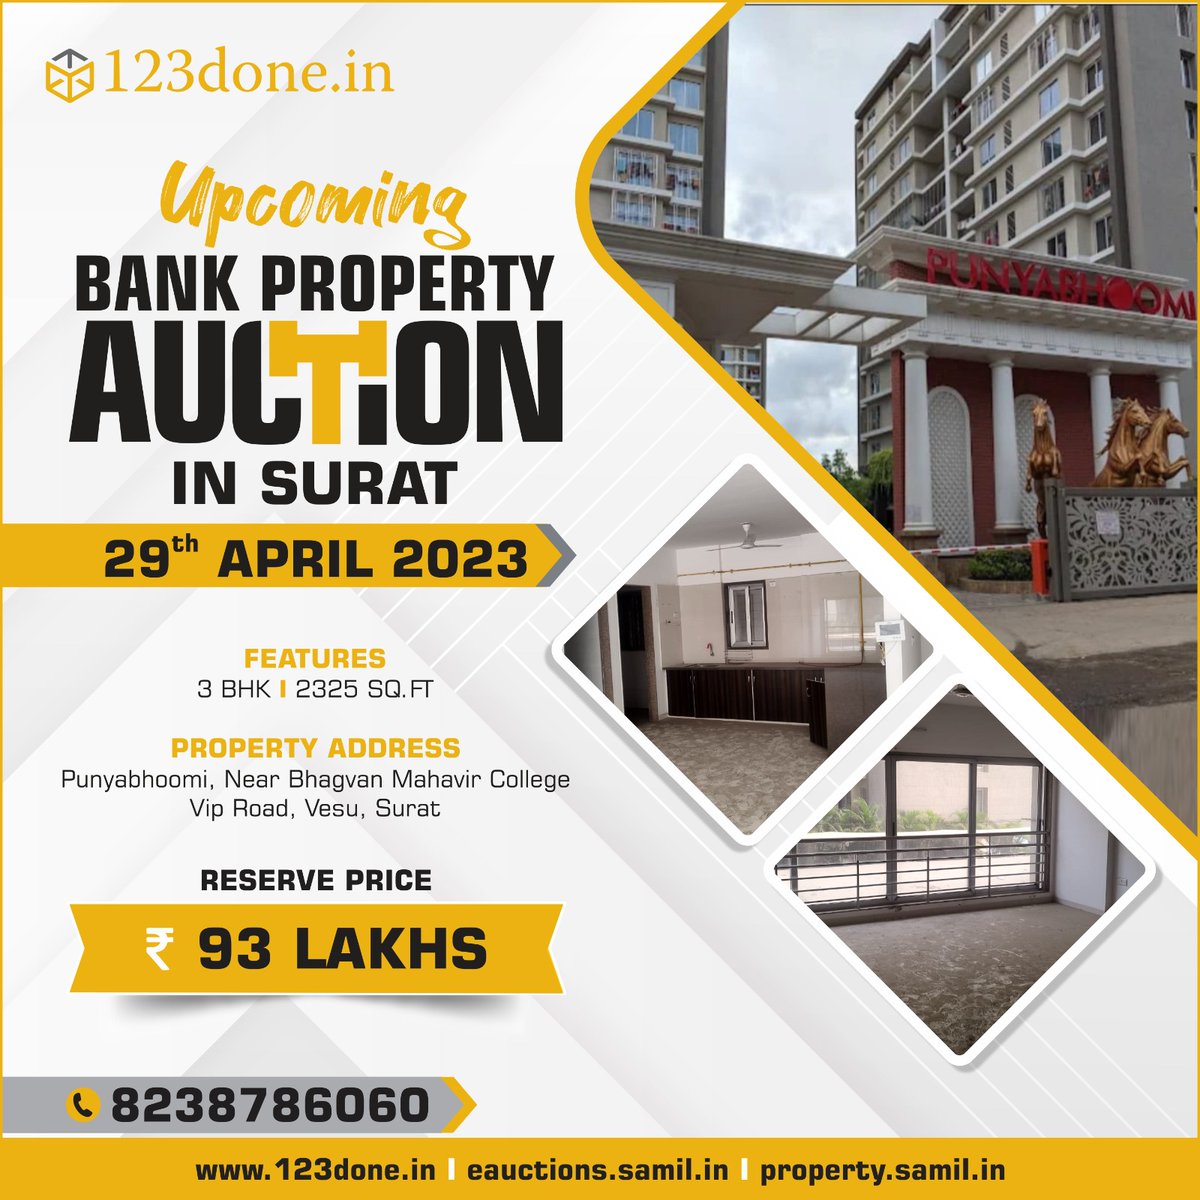 Check out the Upcoming Bank Property Auction in Surat on 29th April 2023.
For more details, contact us now.

Enquire Now: bit.ly/3KvRqW5

#PropertyAuctions #RealEstate #Pune #123done #PhysicalAuction #Samil #ShriramAutomall #ProudSamilian